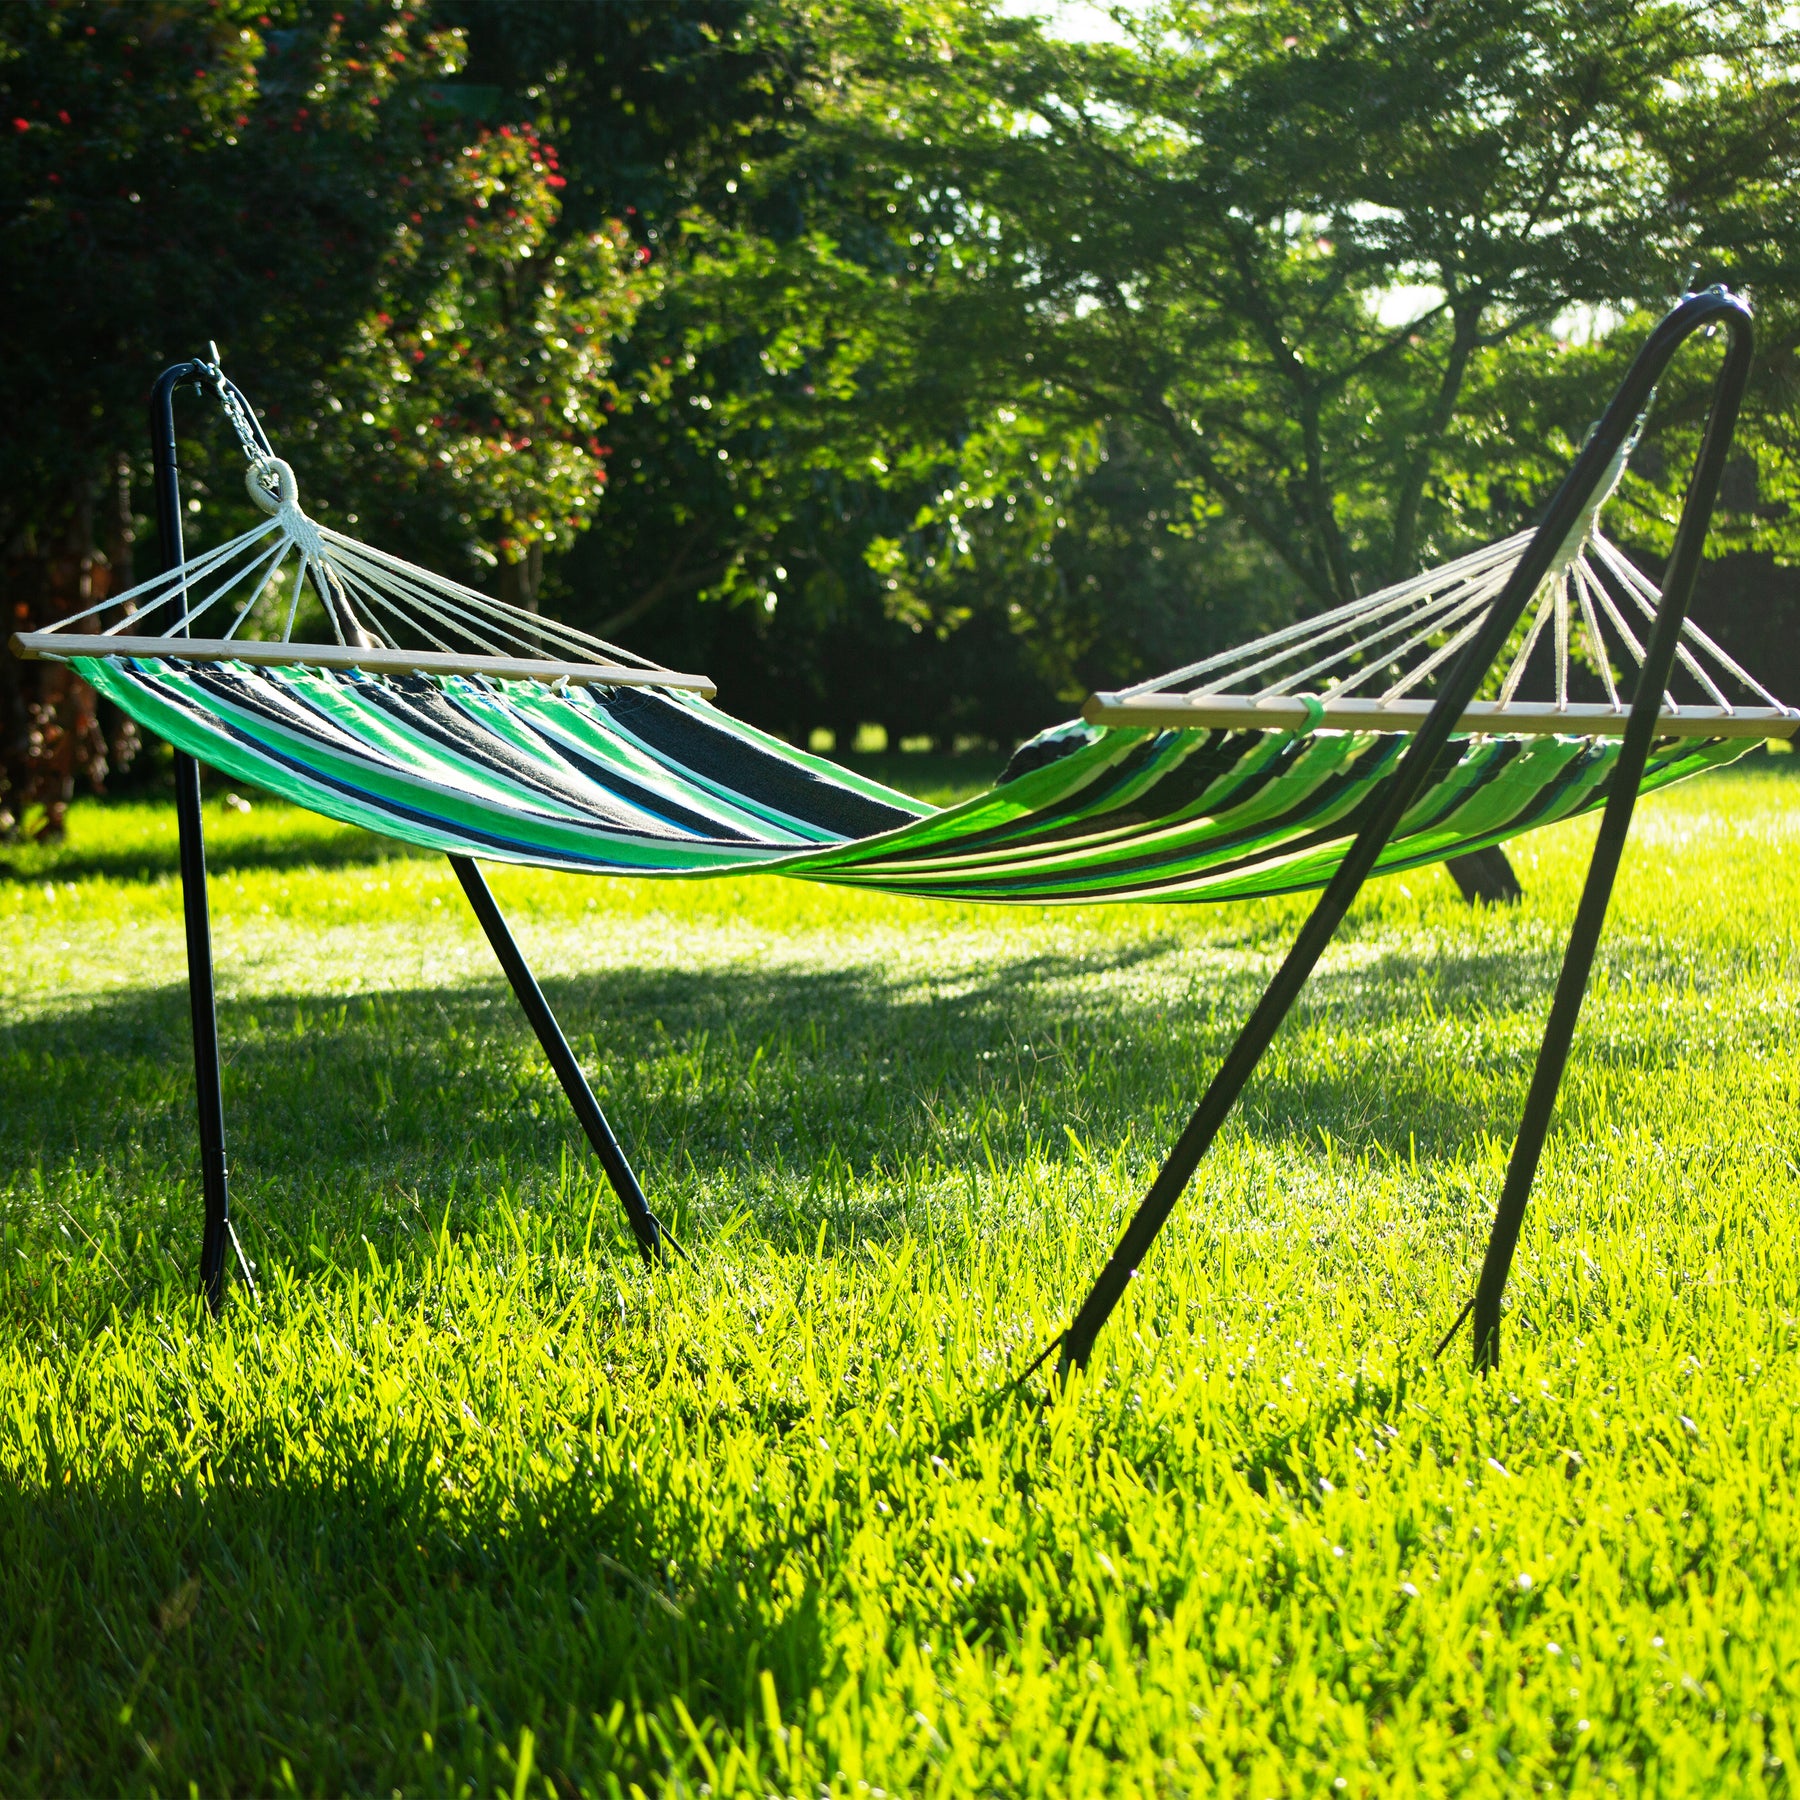 Bliss Hammocks 48-inch Wide Caribbean Hammock with chains attached to a Bliss Hammock Stand in the grass.